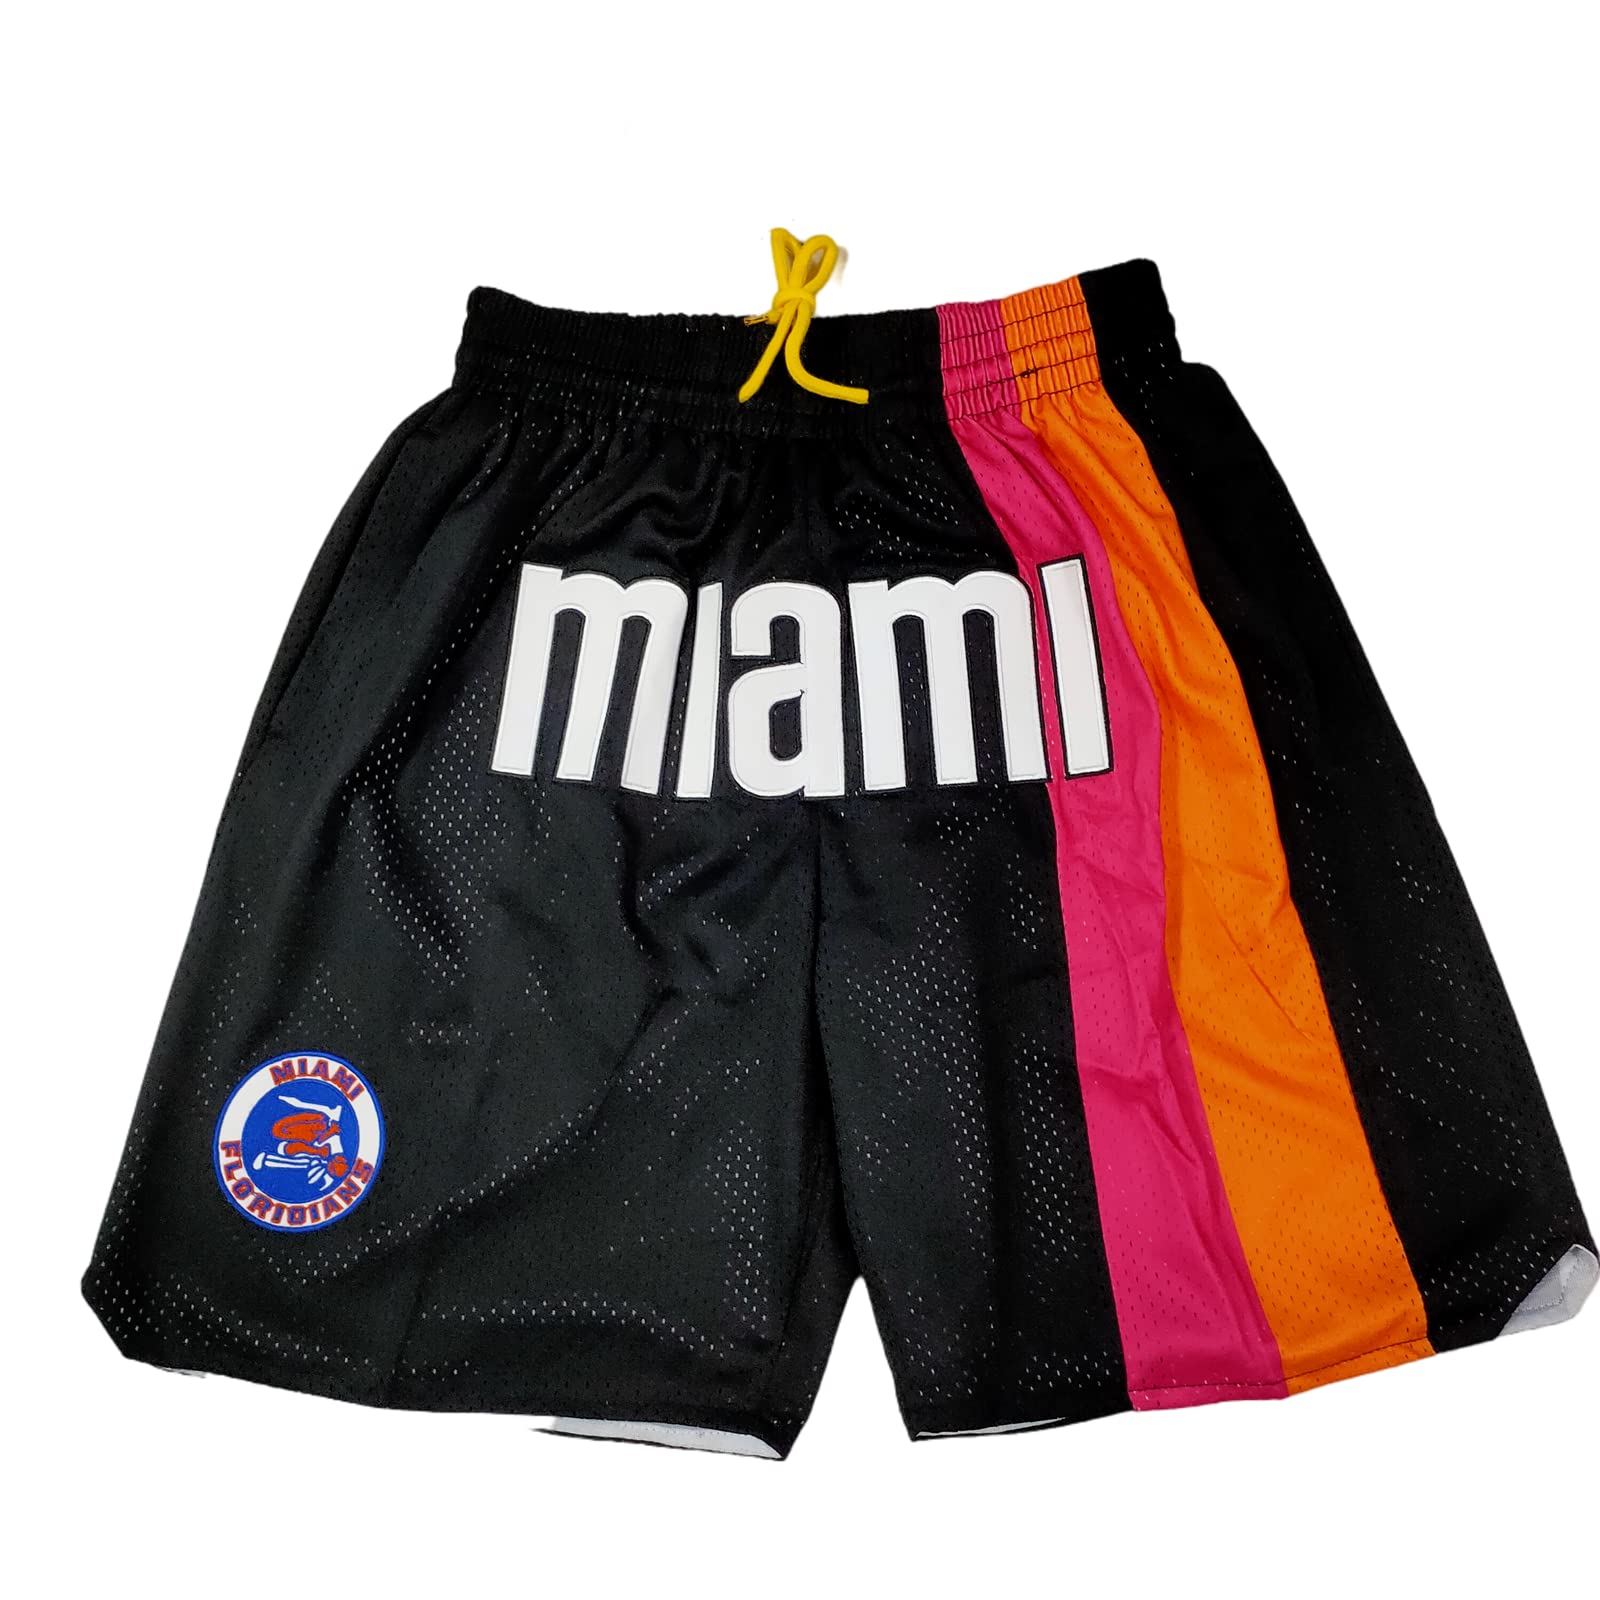 Basketball Shorts Mens,Fans Workout Gym Athletic Casual Shorts,Men Retro Mesh Embroidered with Pockets